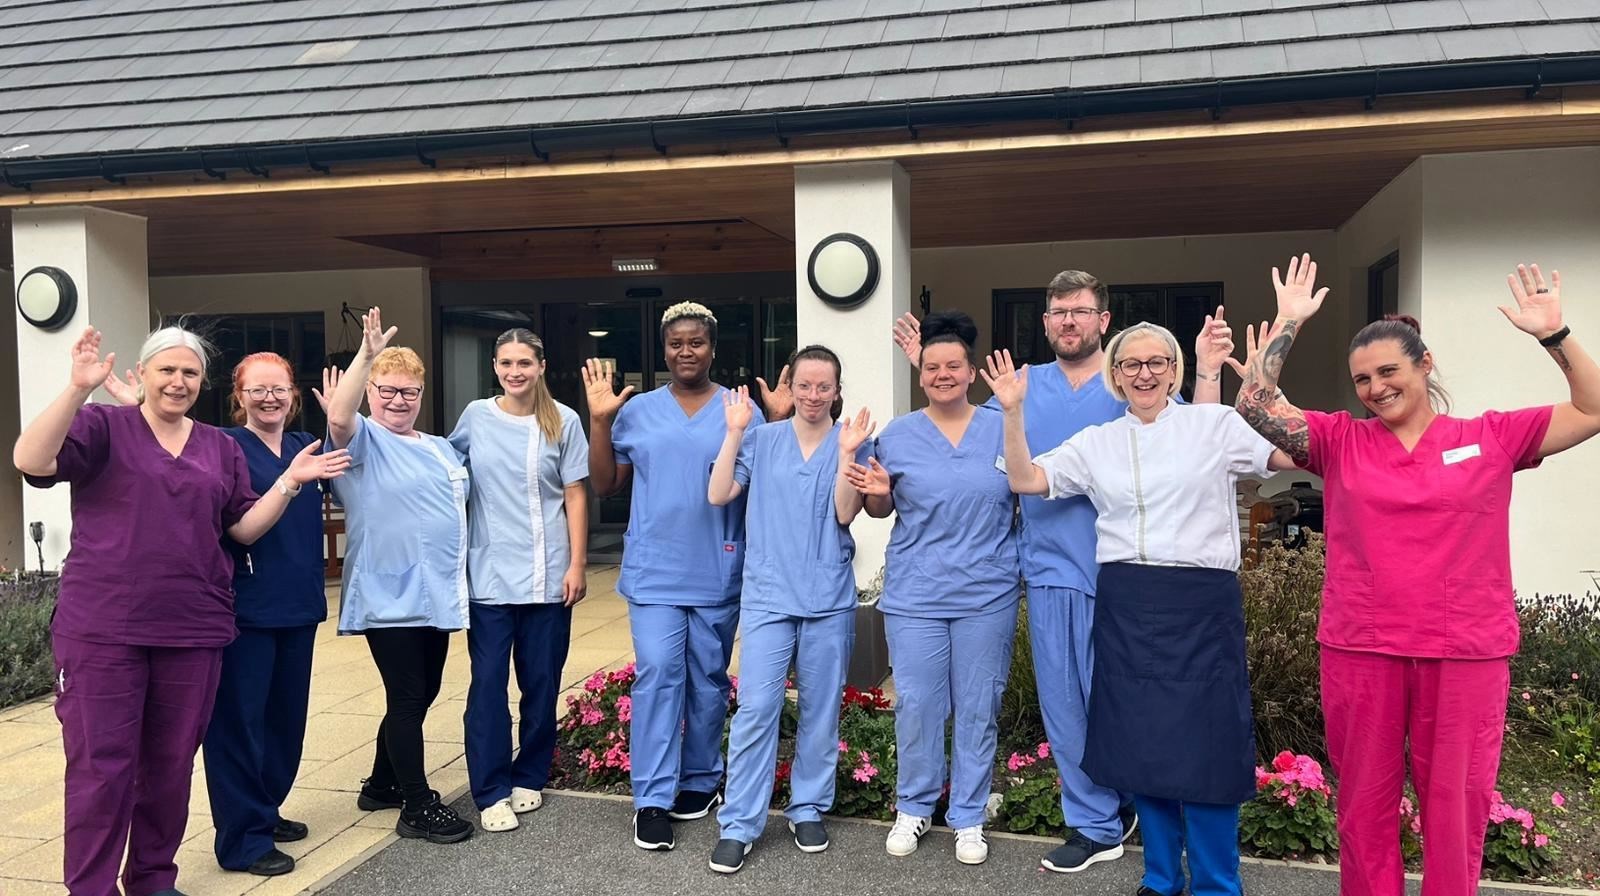 The Lynemore care home team celebrate the latest inspection report findings